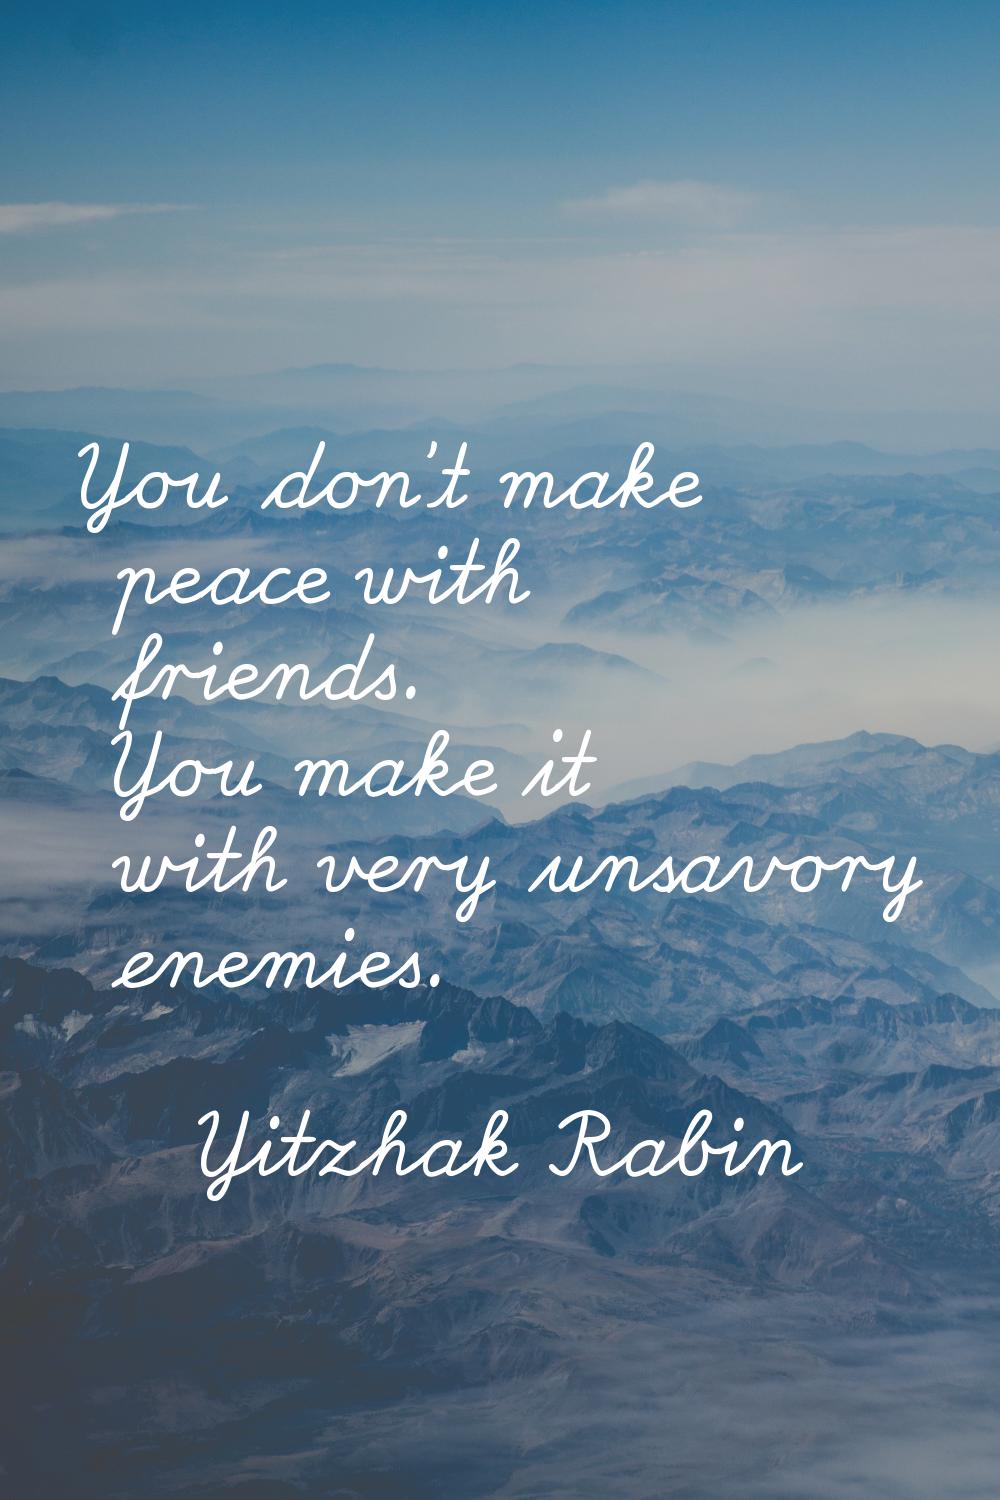 You don't make peace with friends. You make it with very unsavory enemies.